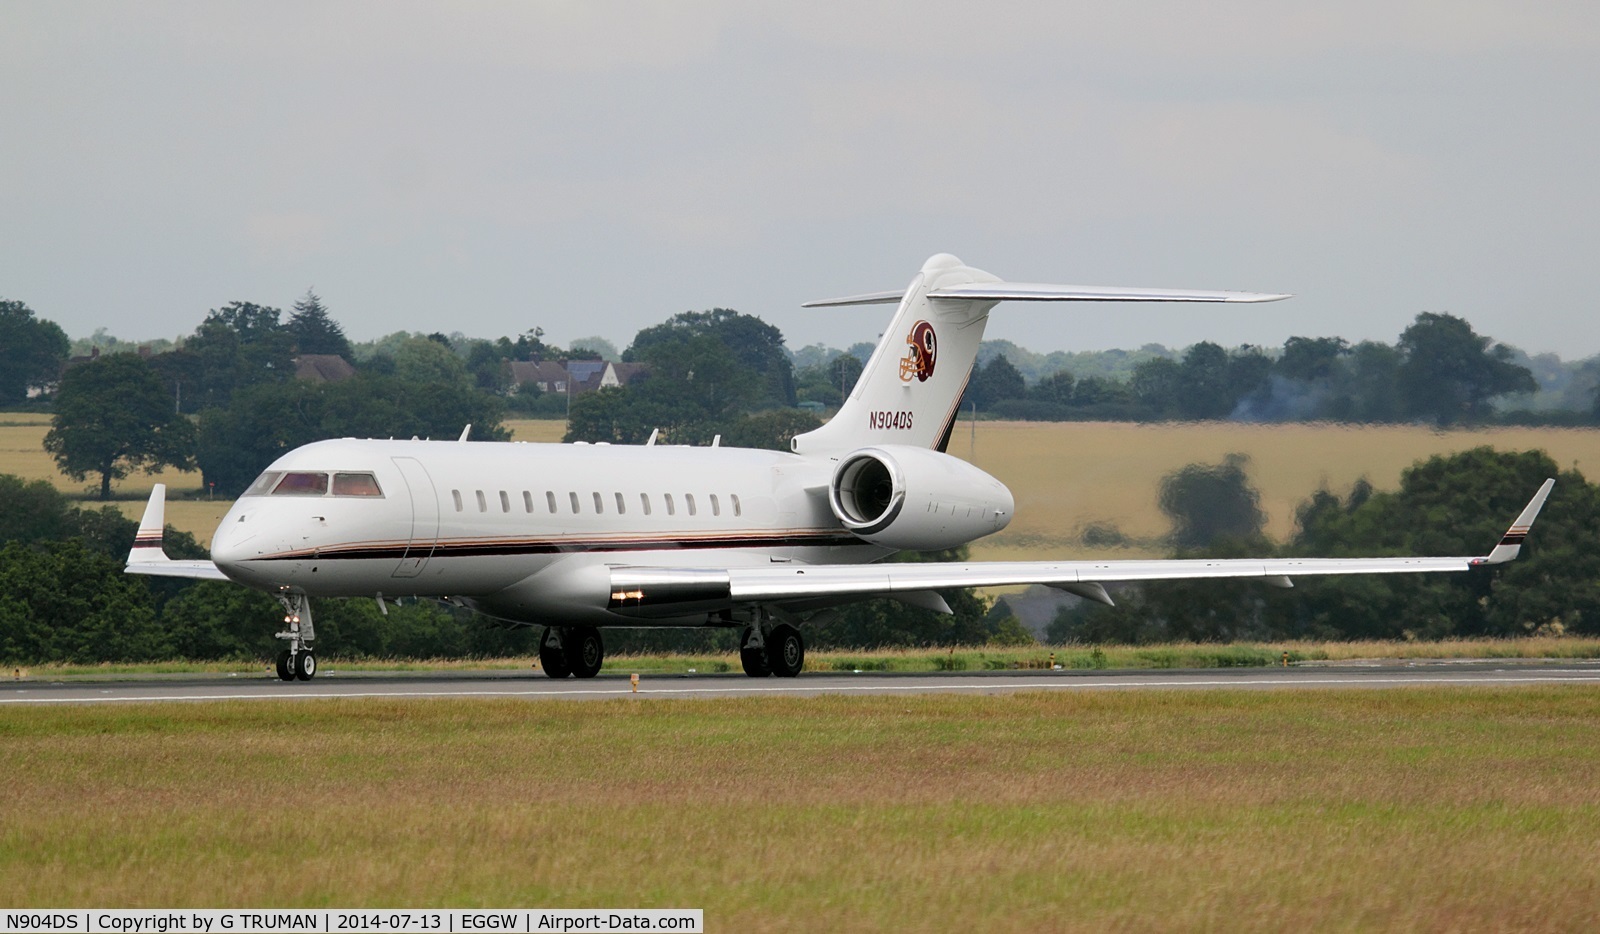 N904DS, 2002 Bombardier BD-700-1A10 Global Express C/N 9118, Departing Luton on a humid, hazy day